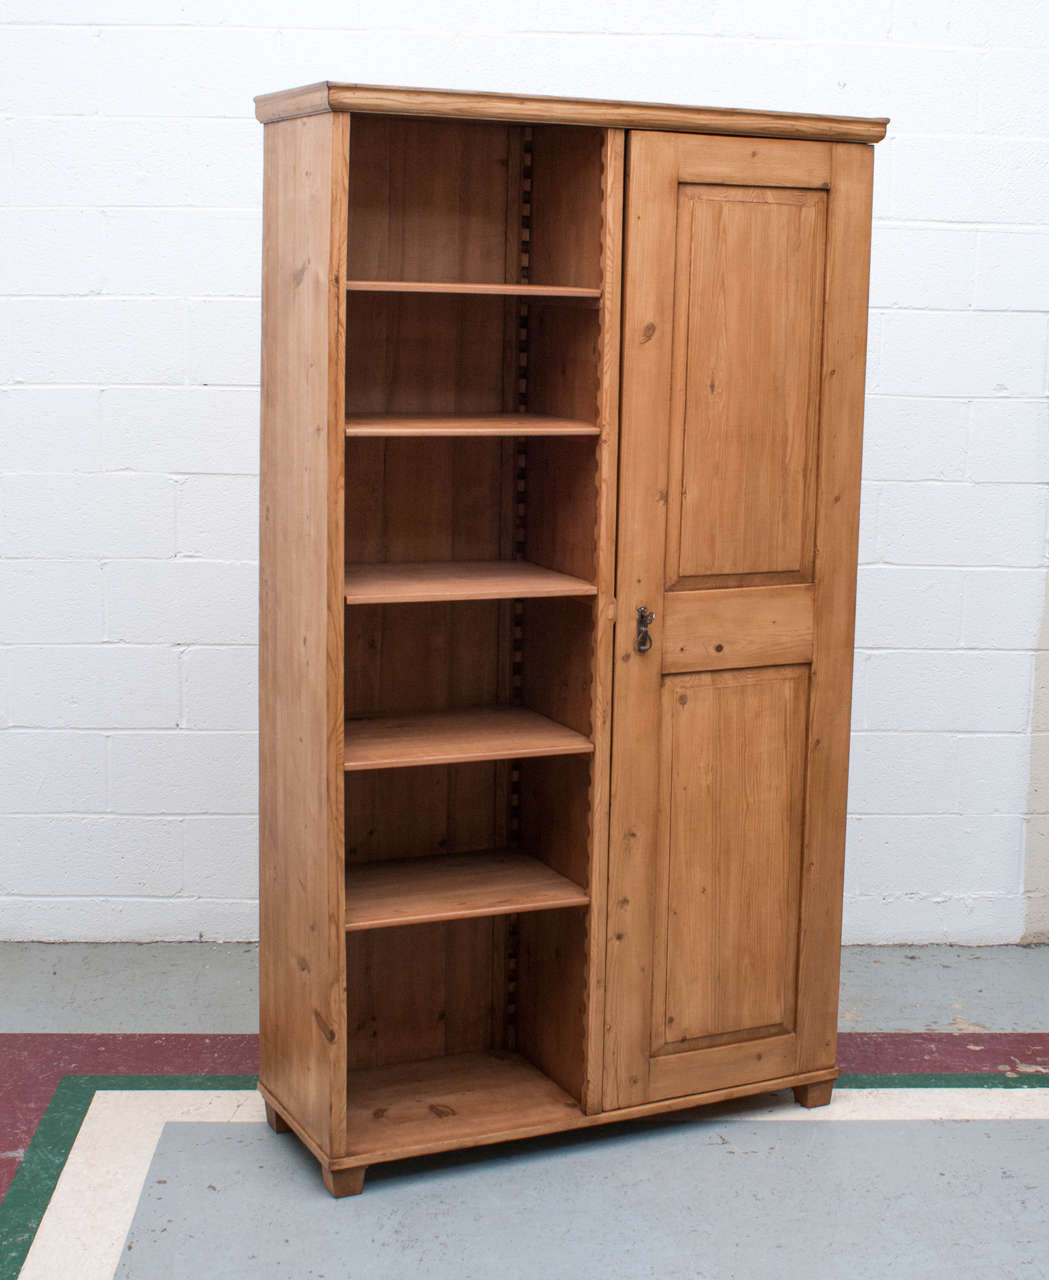 A wardrobe with an unusual configuration of a single raised panel door on one side and a run of five open shelves on the other. Both interior and open shelves are fully adjustable on original wooden track.